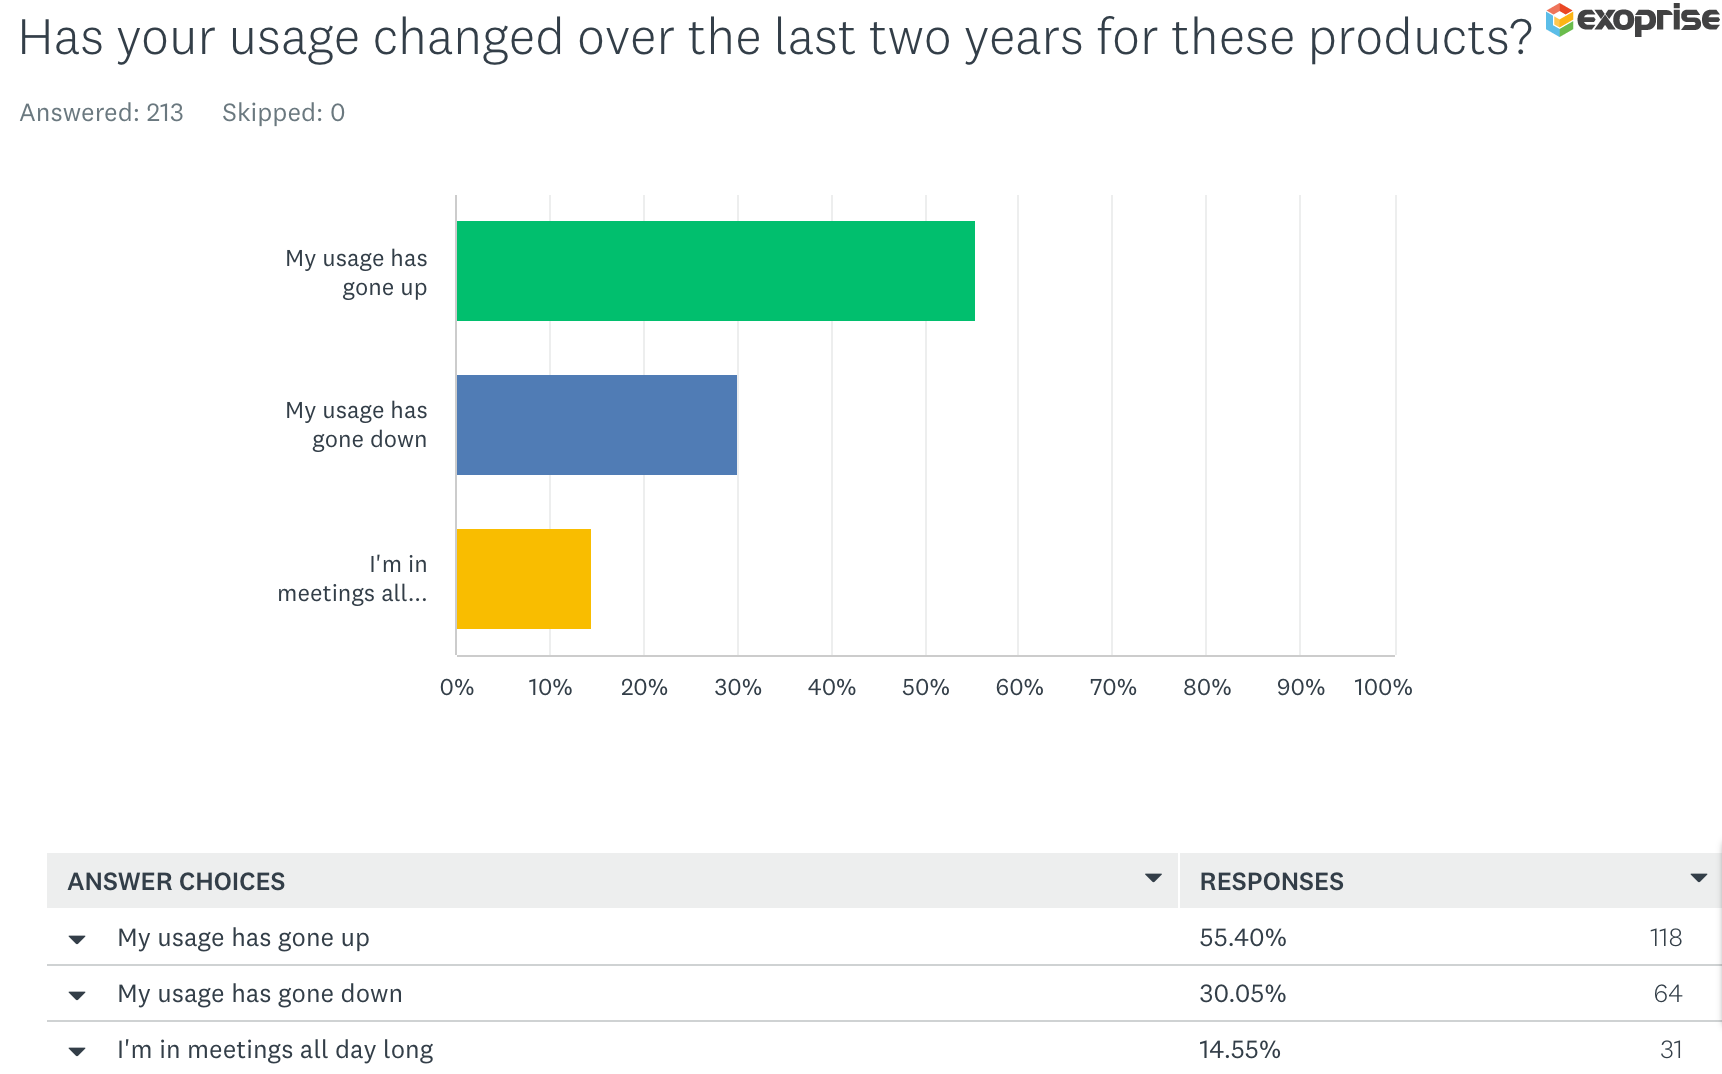 Has your productivity suite usage changed over the last two years?